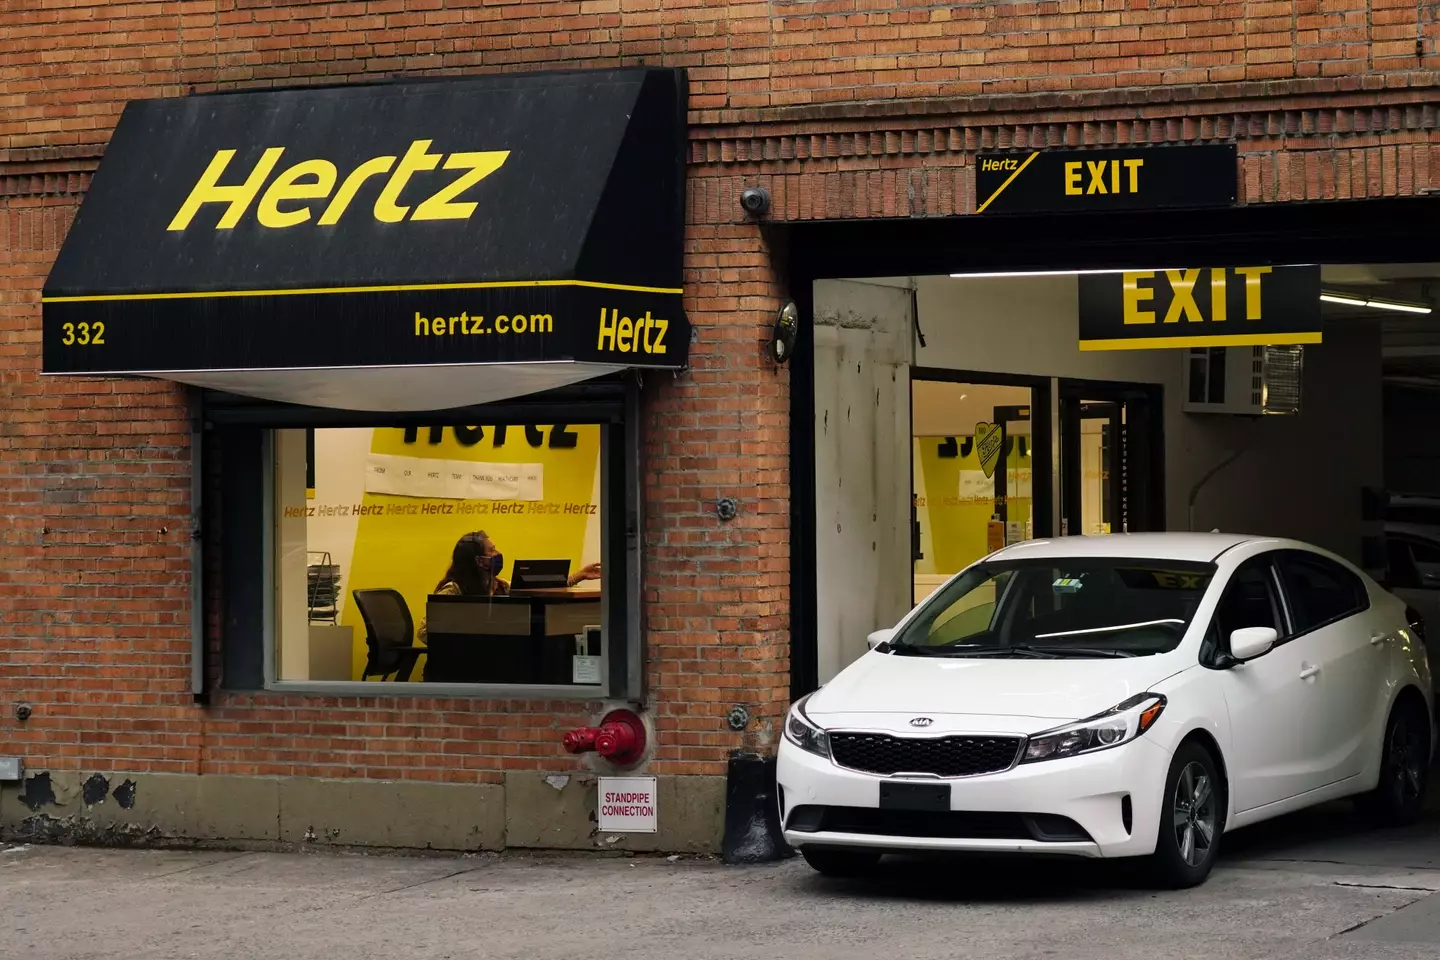 Hertz is hopeful the sale will be beneficial.